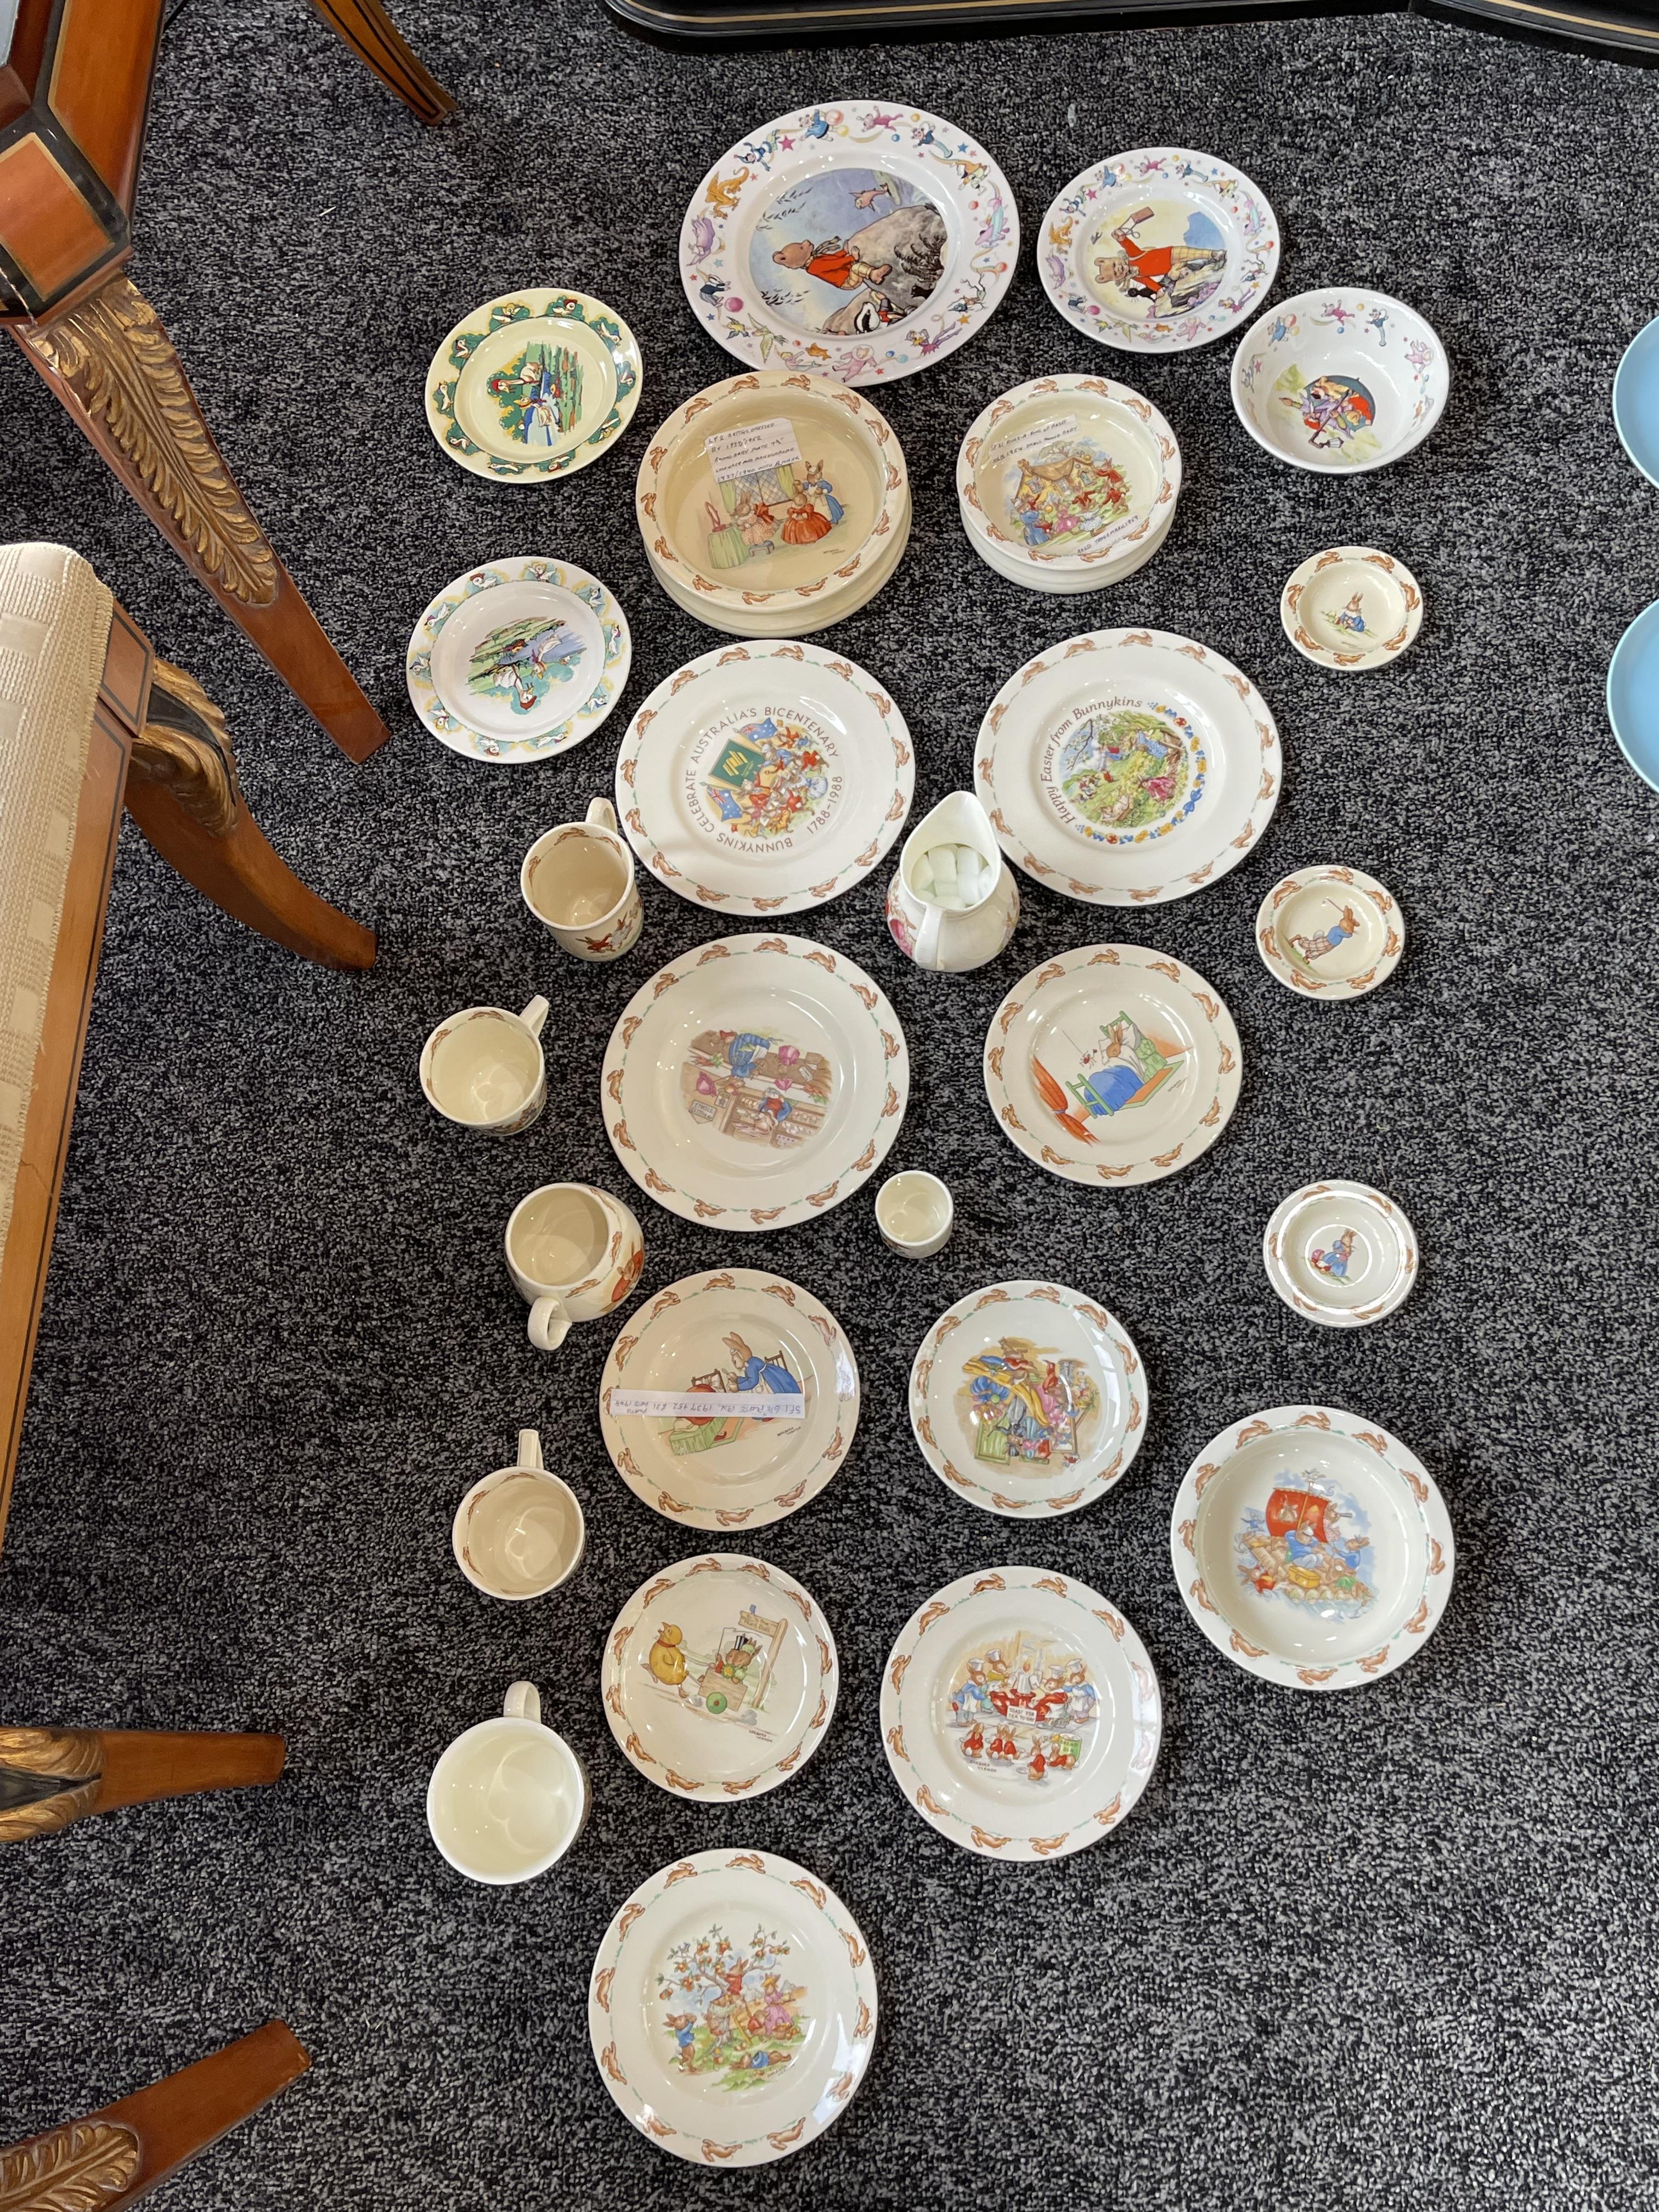 Quantity of Royal Doulton - Bunnykins and Wedgewoo - Image 9 of 9